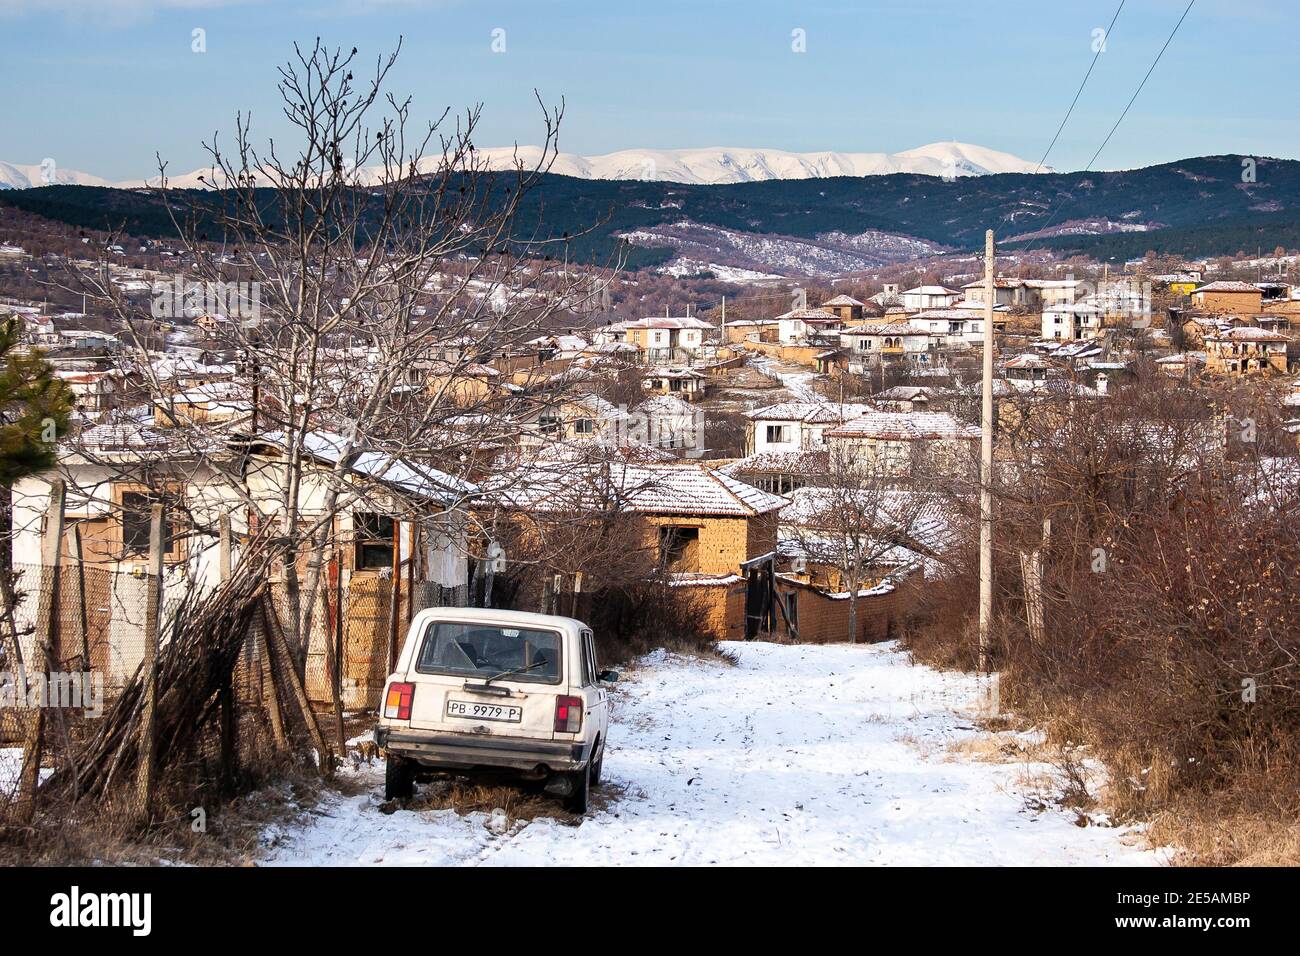 View of the snow capped Stara Planina mountain range over a village in Bulgaria Stock Photo